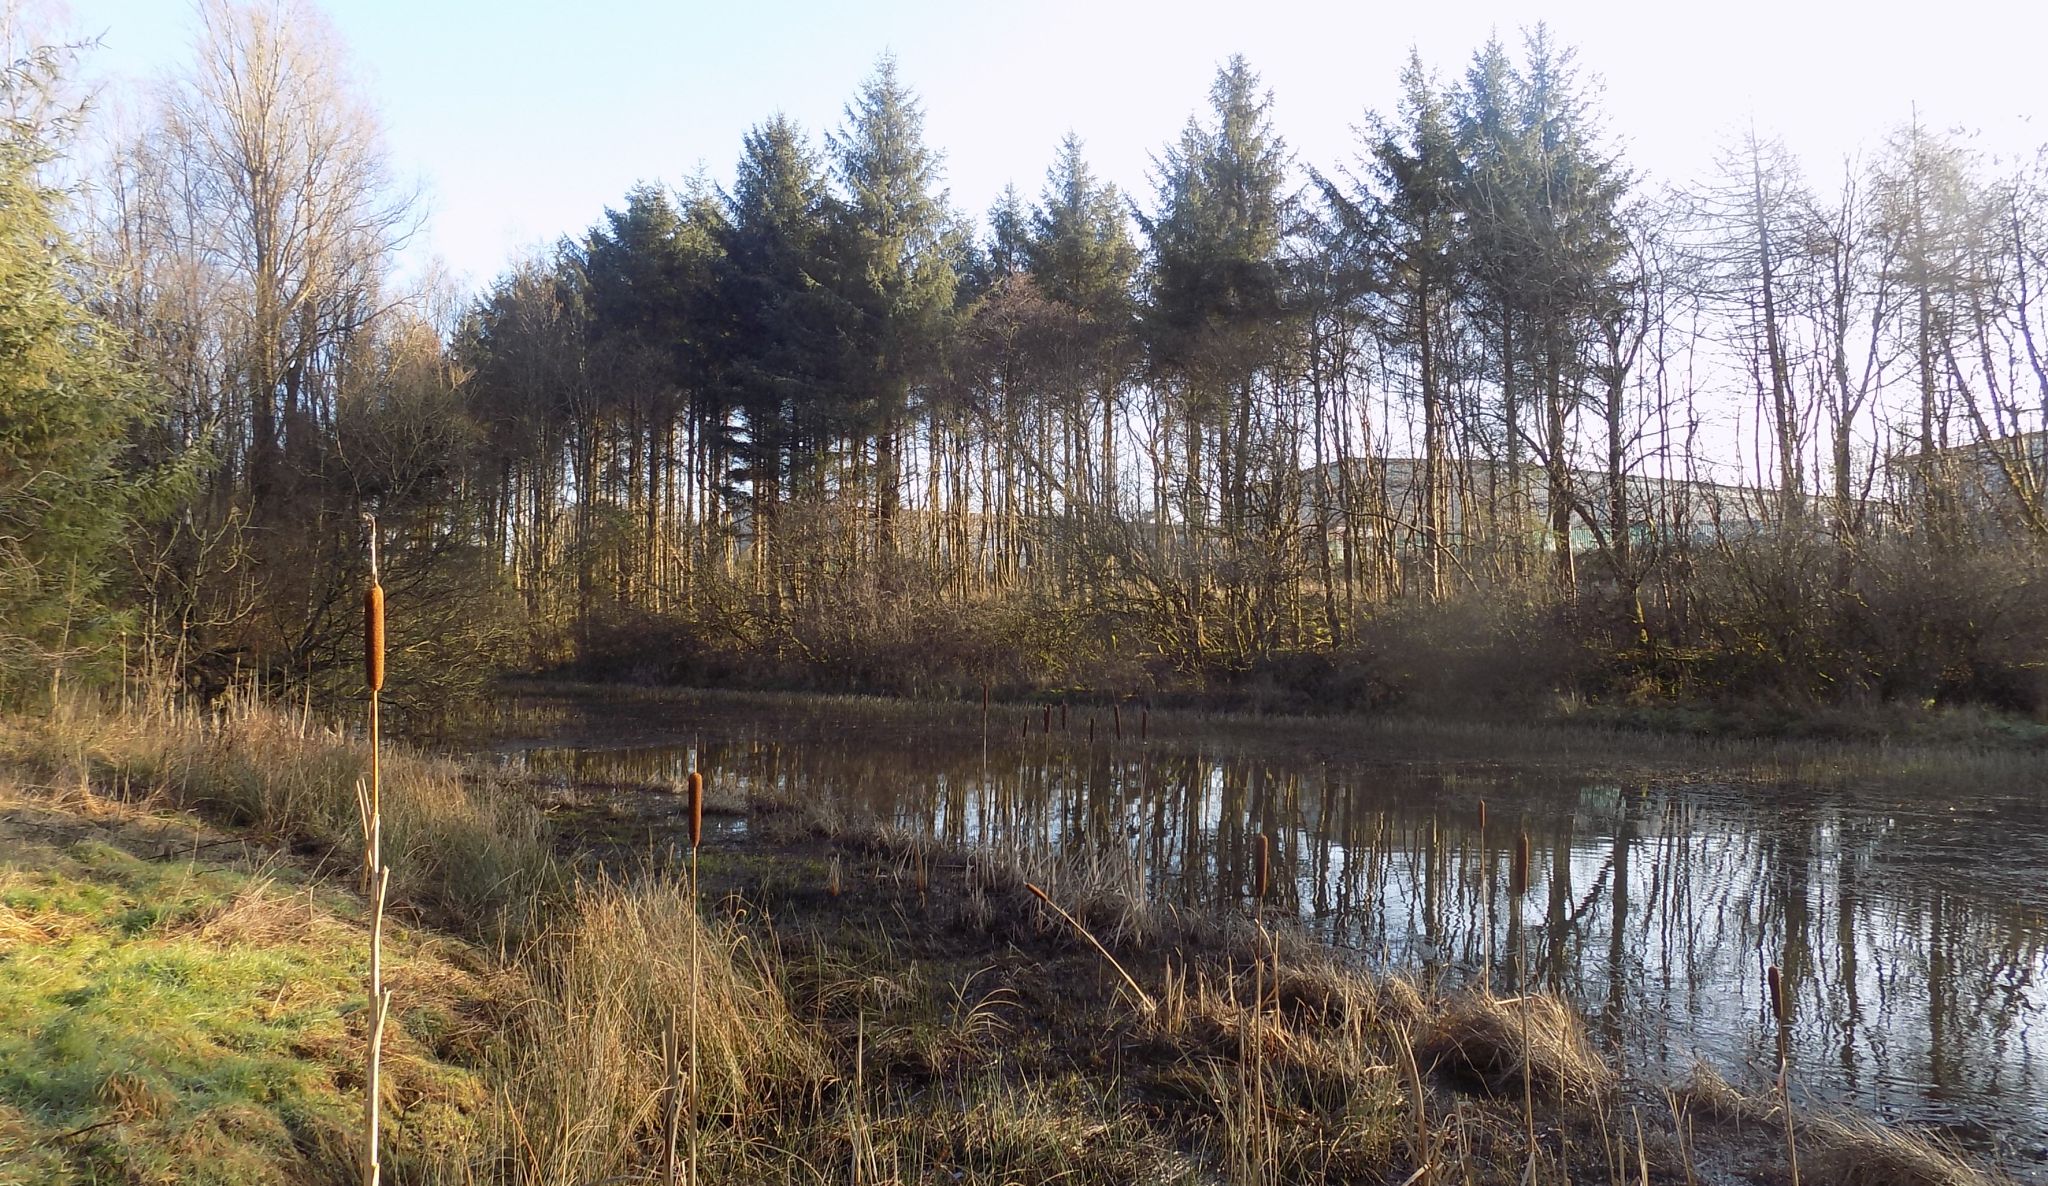 Pond in Orchardton Woods at Cumbernauld